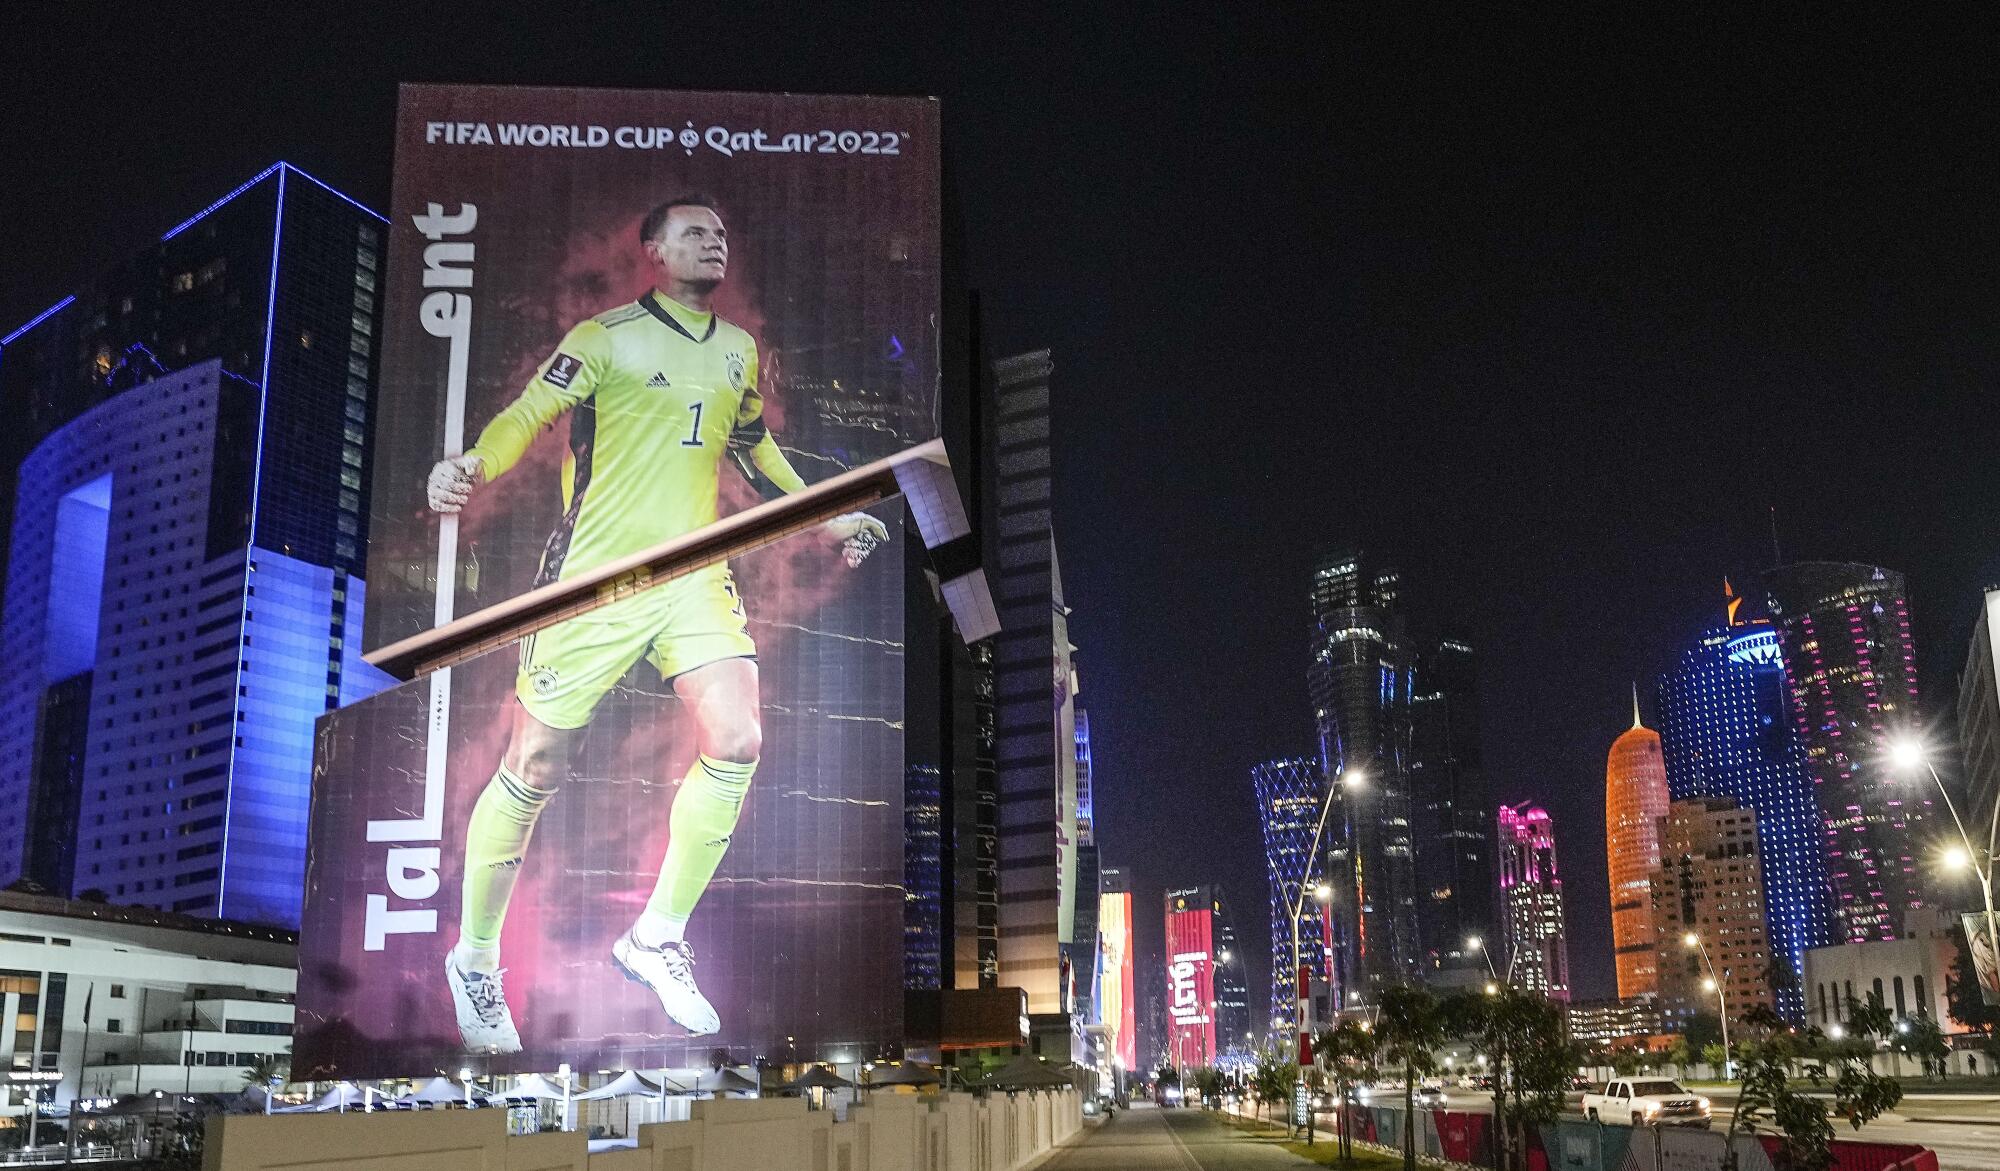 Germany star Manuel Neuer is featured on the side of a building in Doha, Qatar, ahead of the 2022 World Cup.